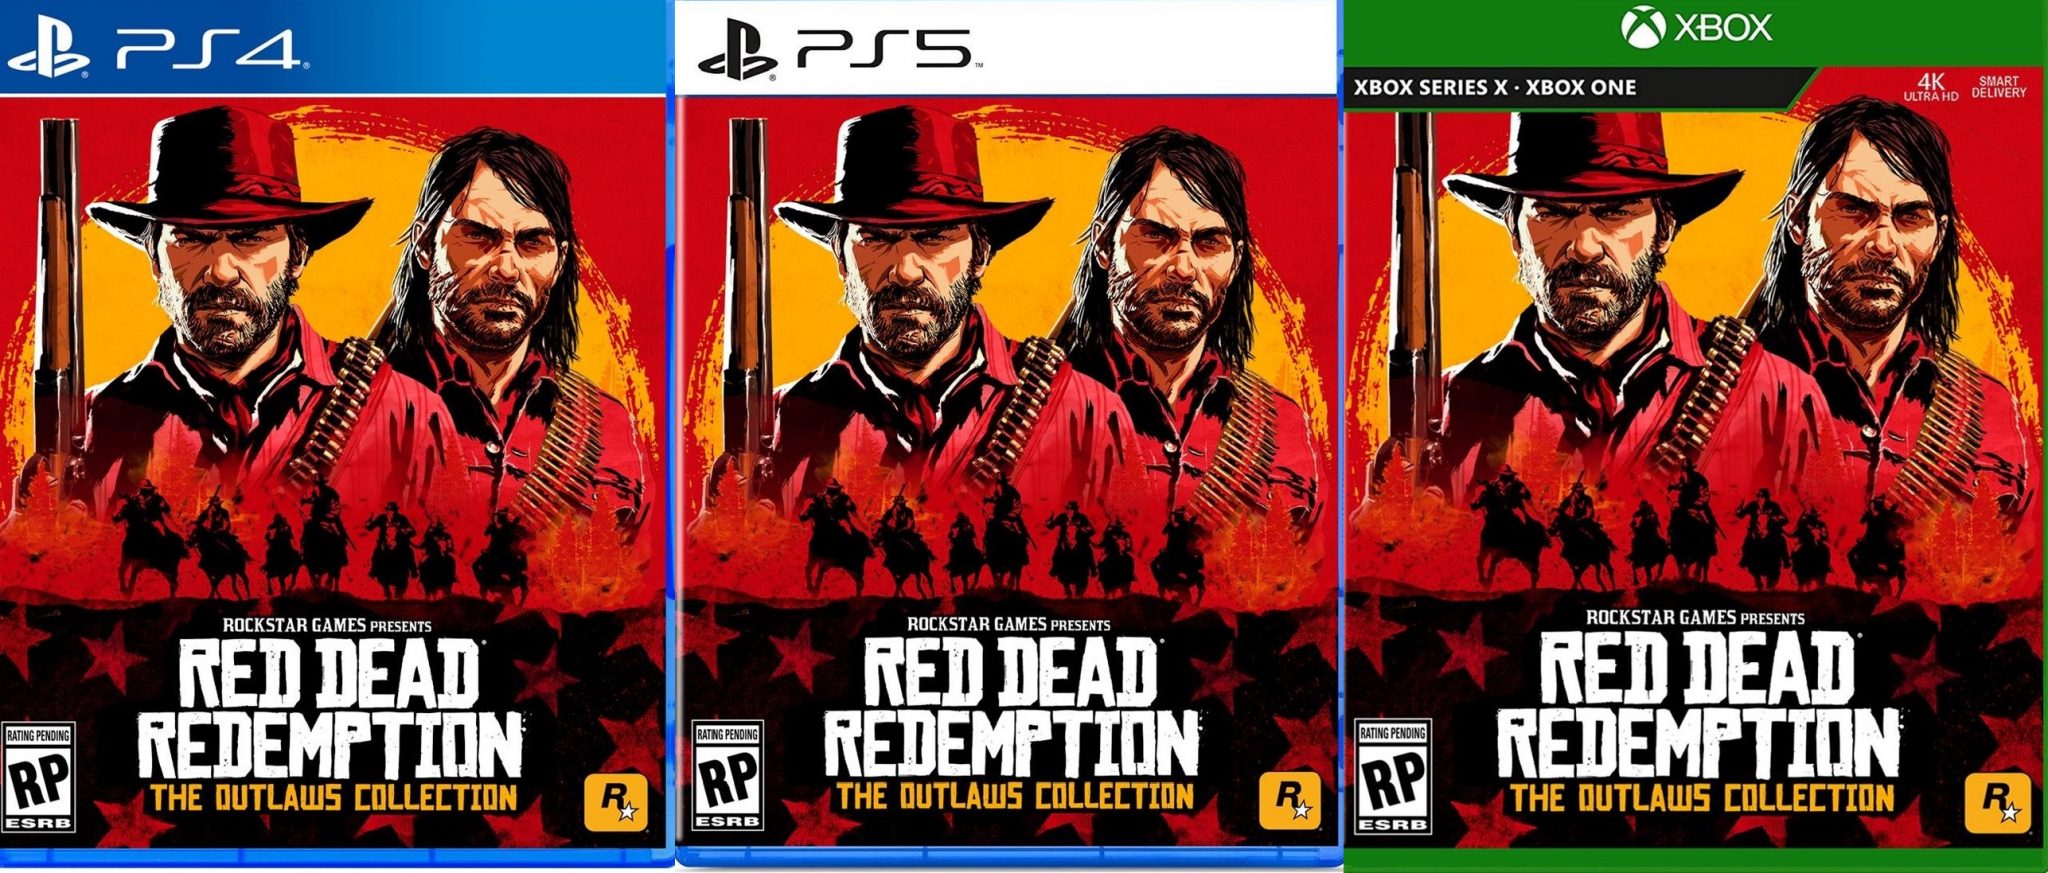 Red Dead Redemption The Outlaws Collection Leaked for PS4, PS5, Xbox